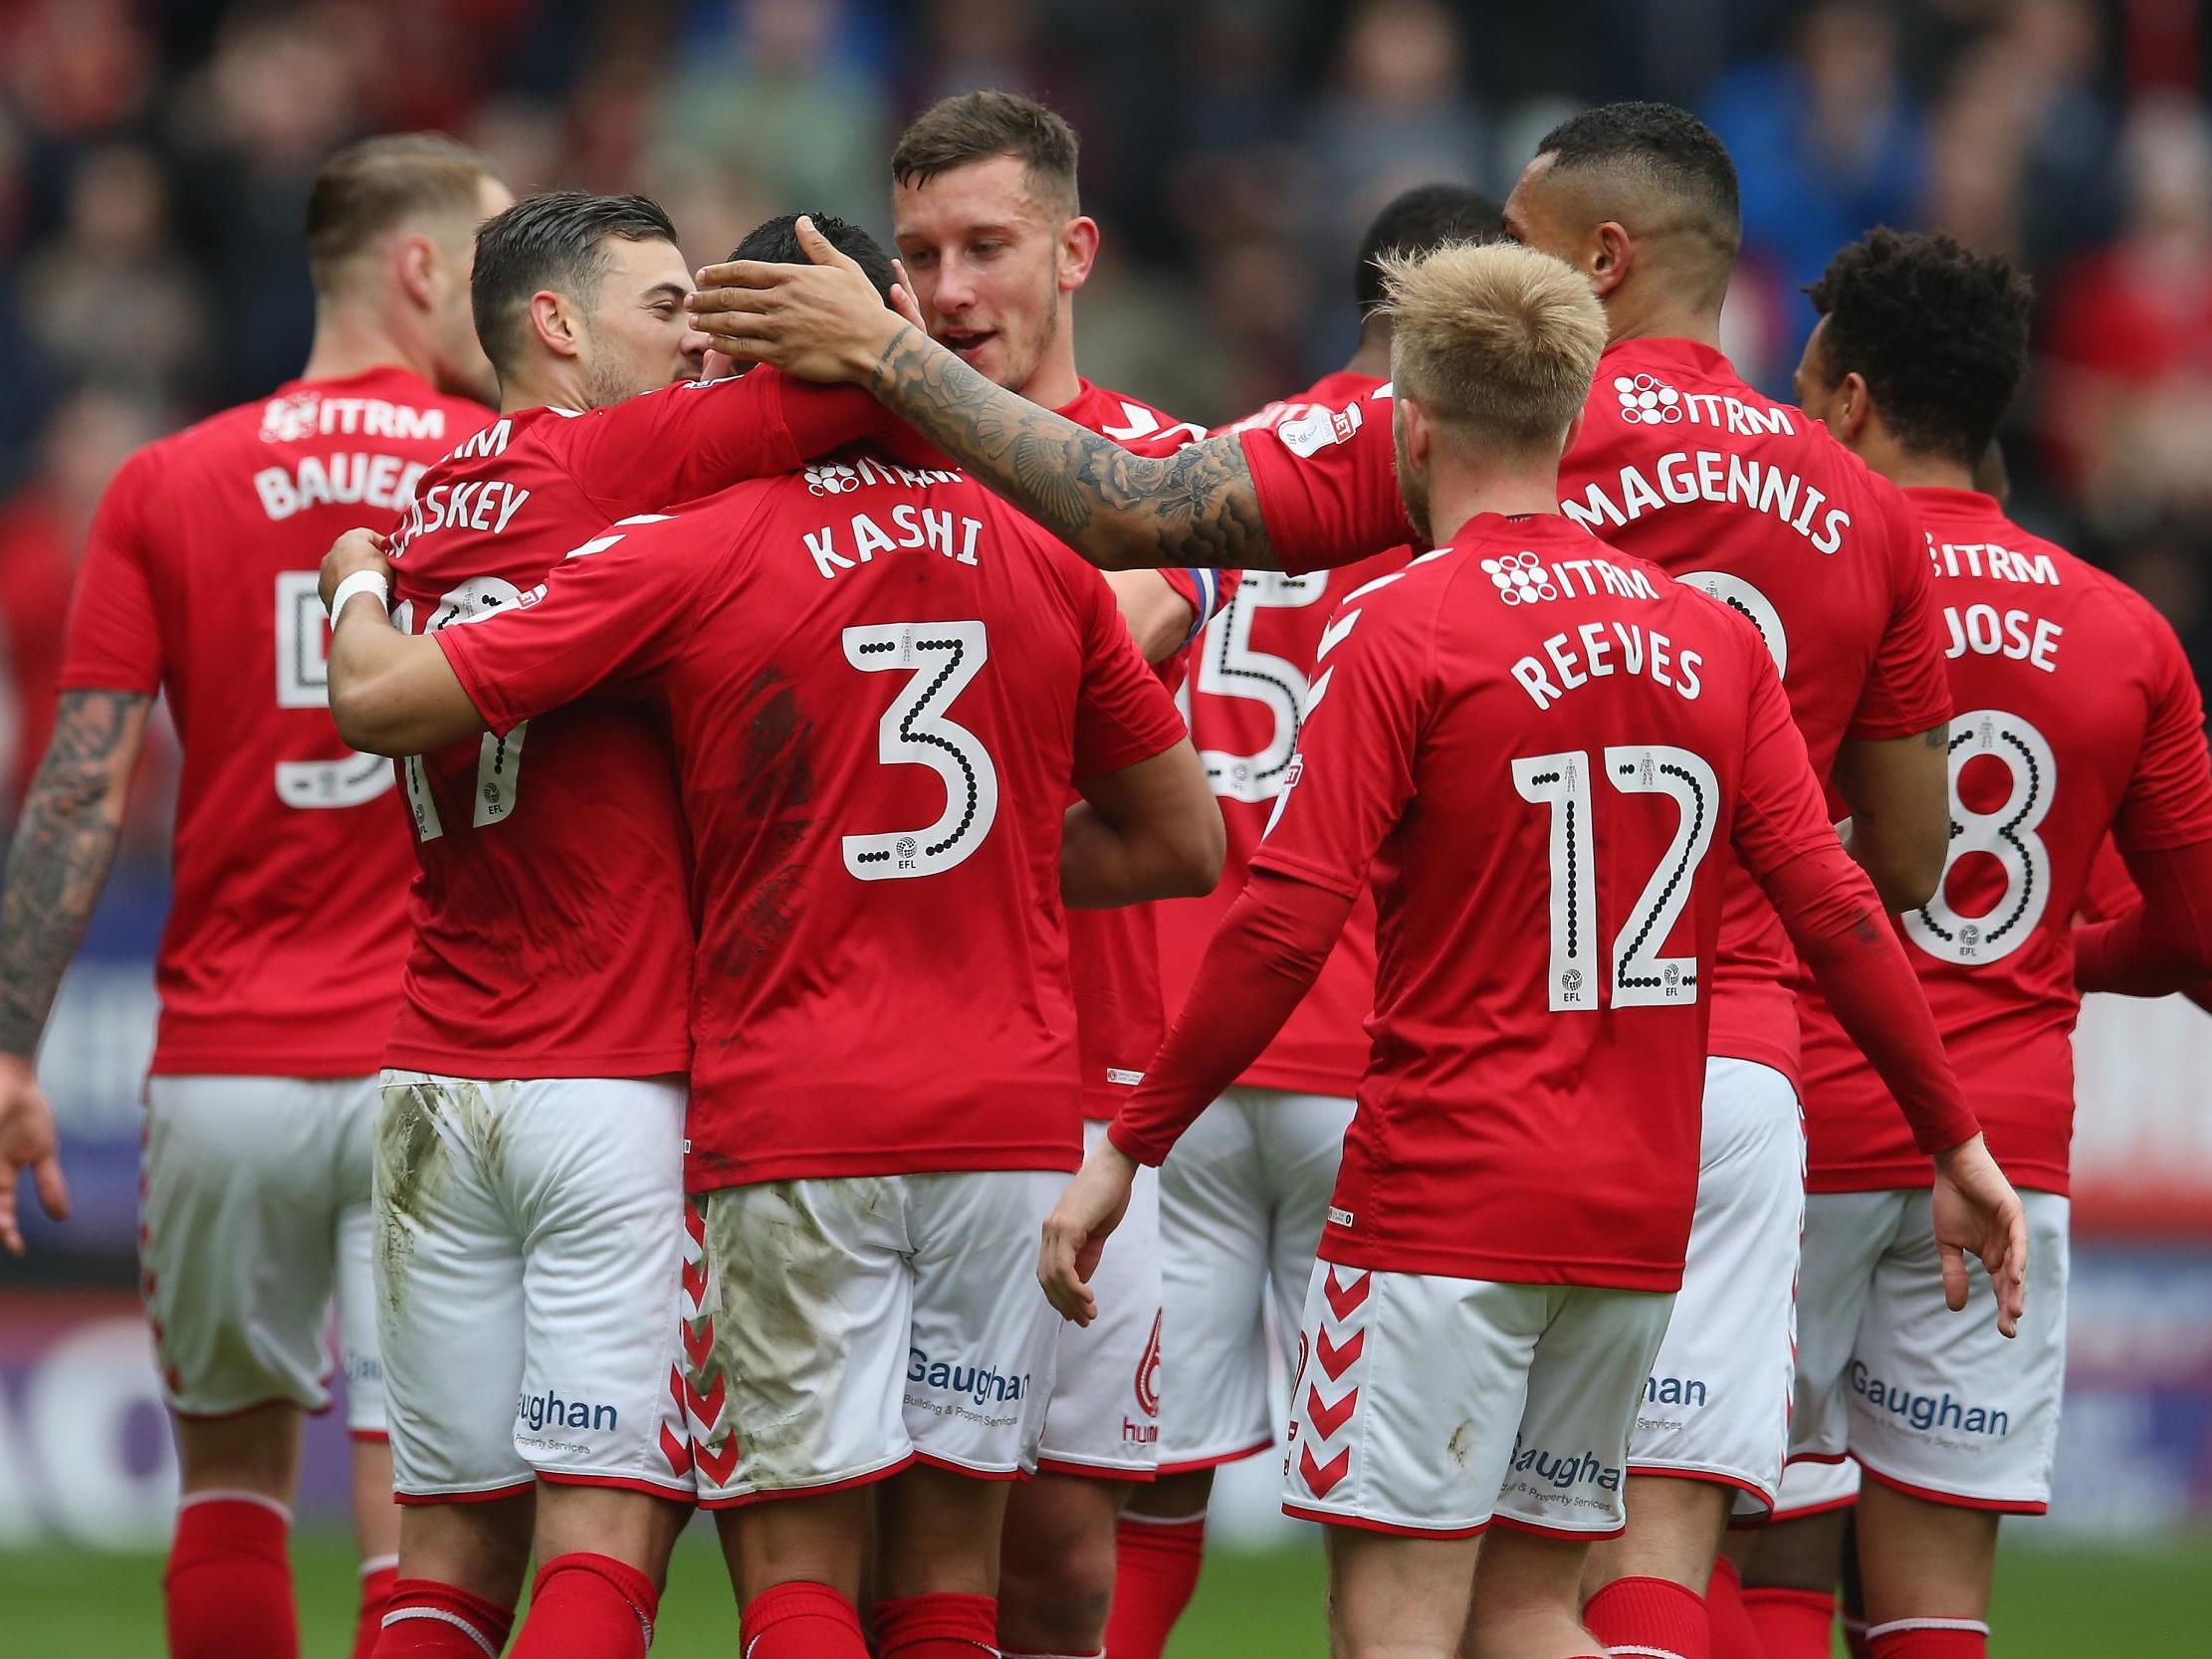 Charlton face another year in League One